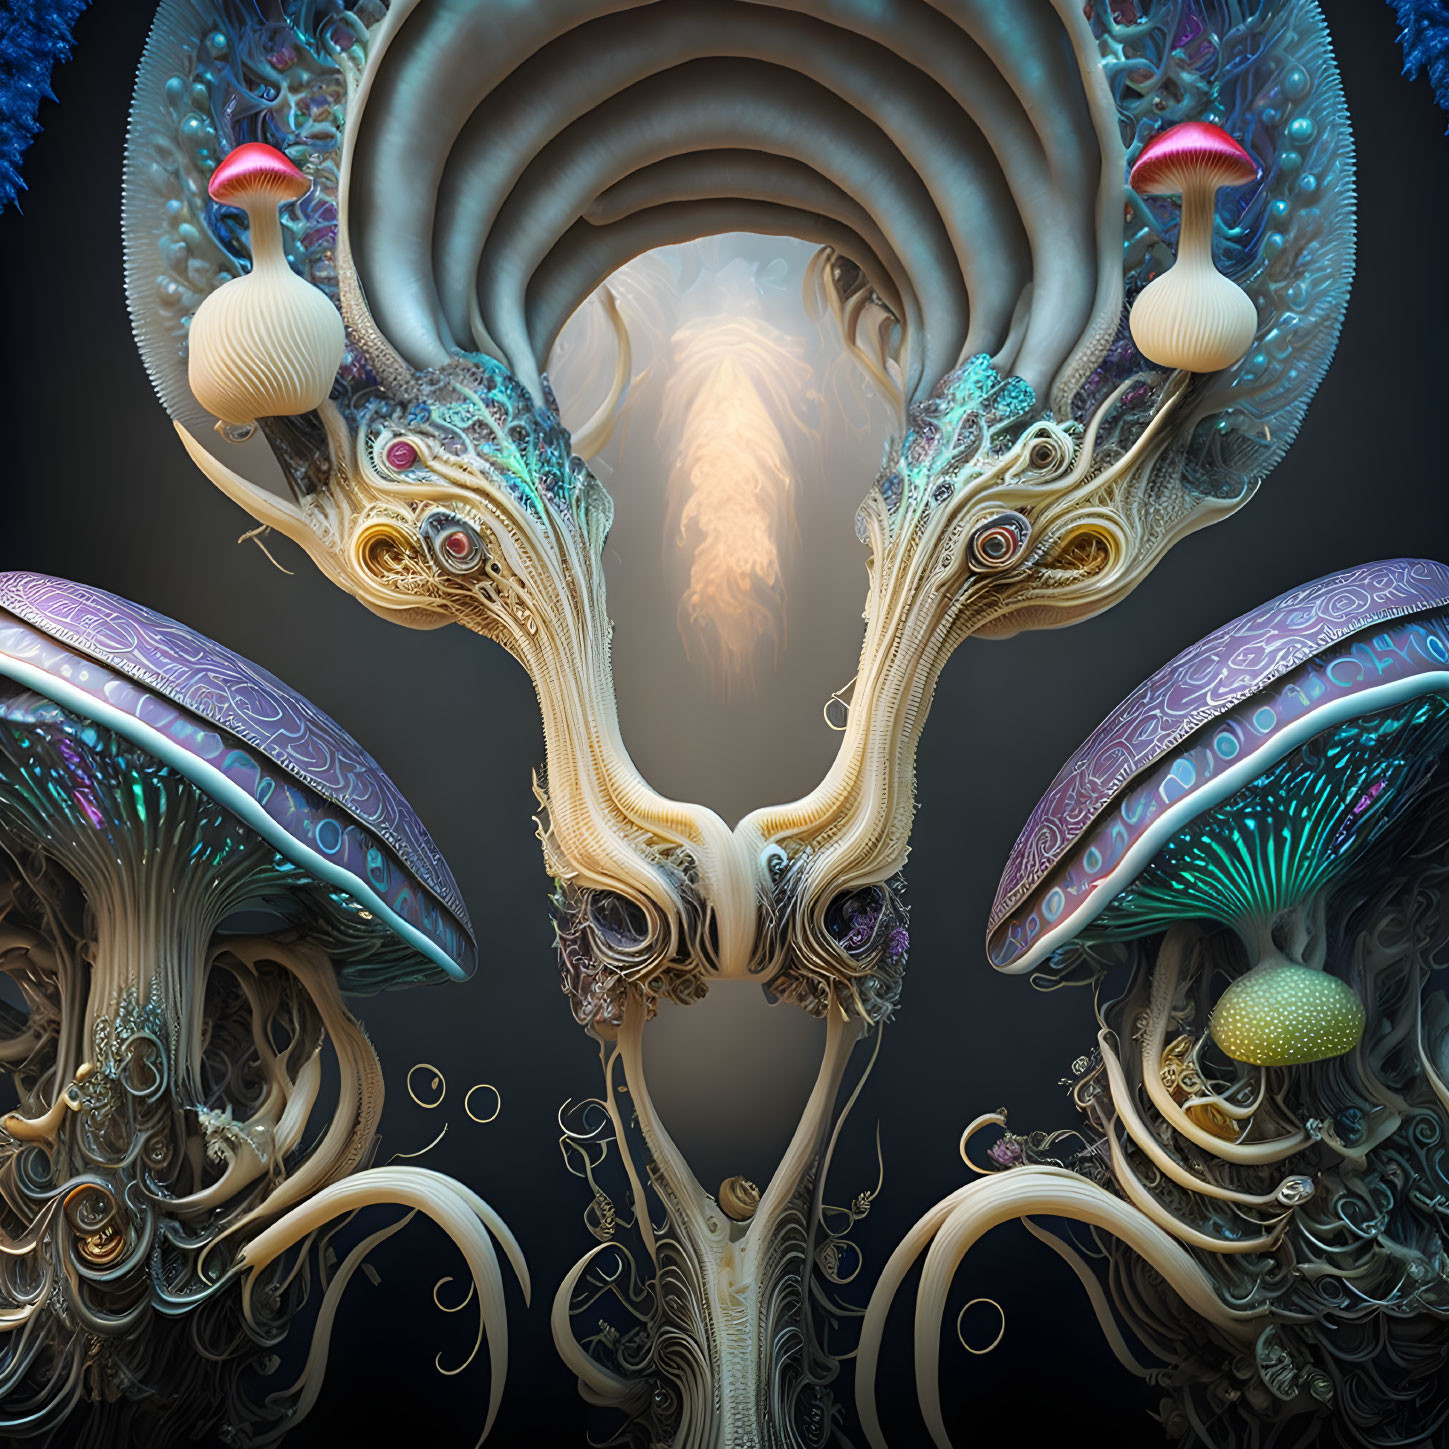 Colorful fractal artwork of intricate mushroom structures